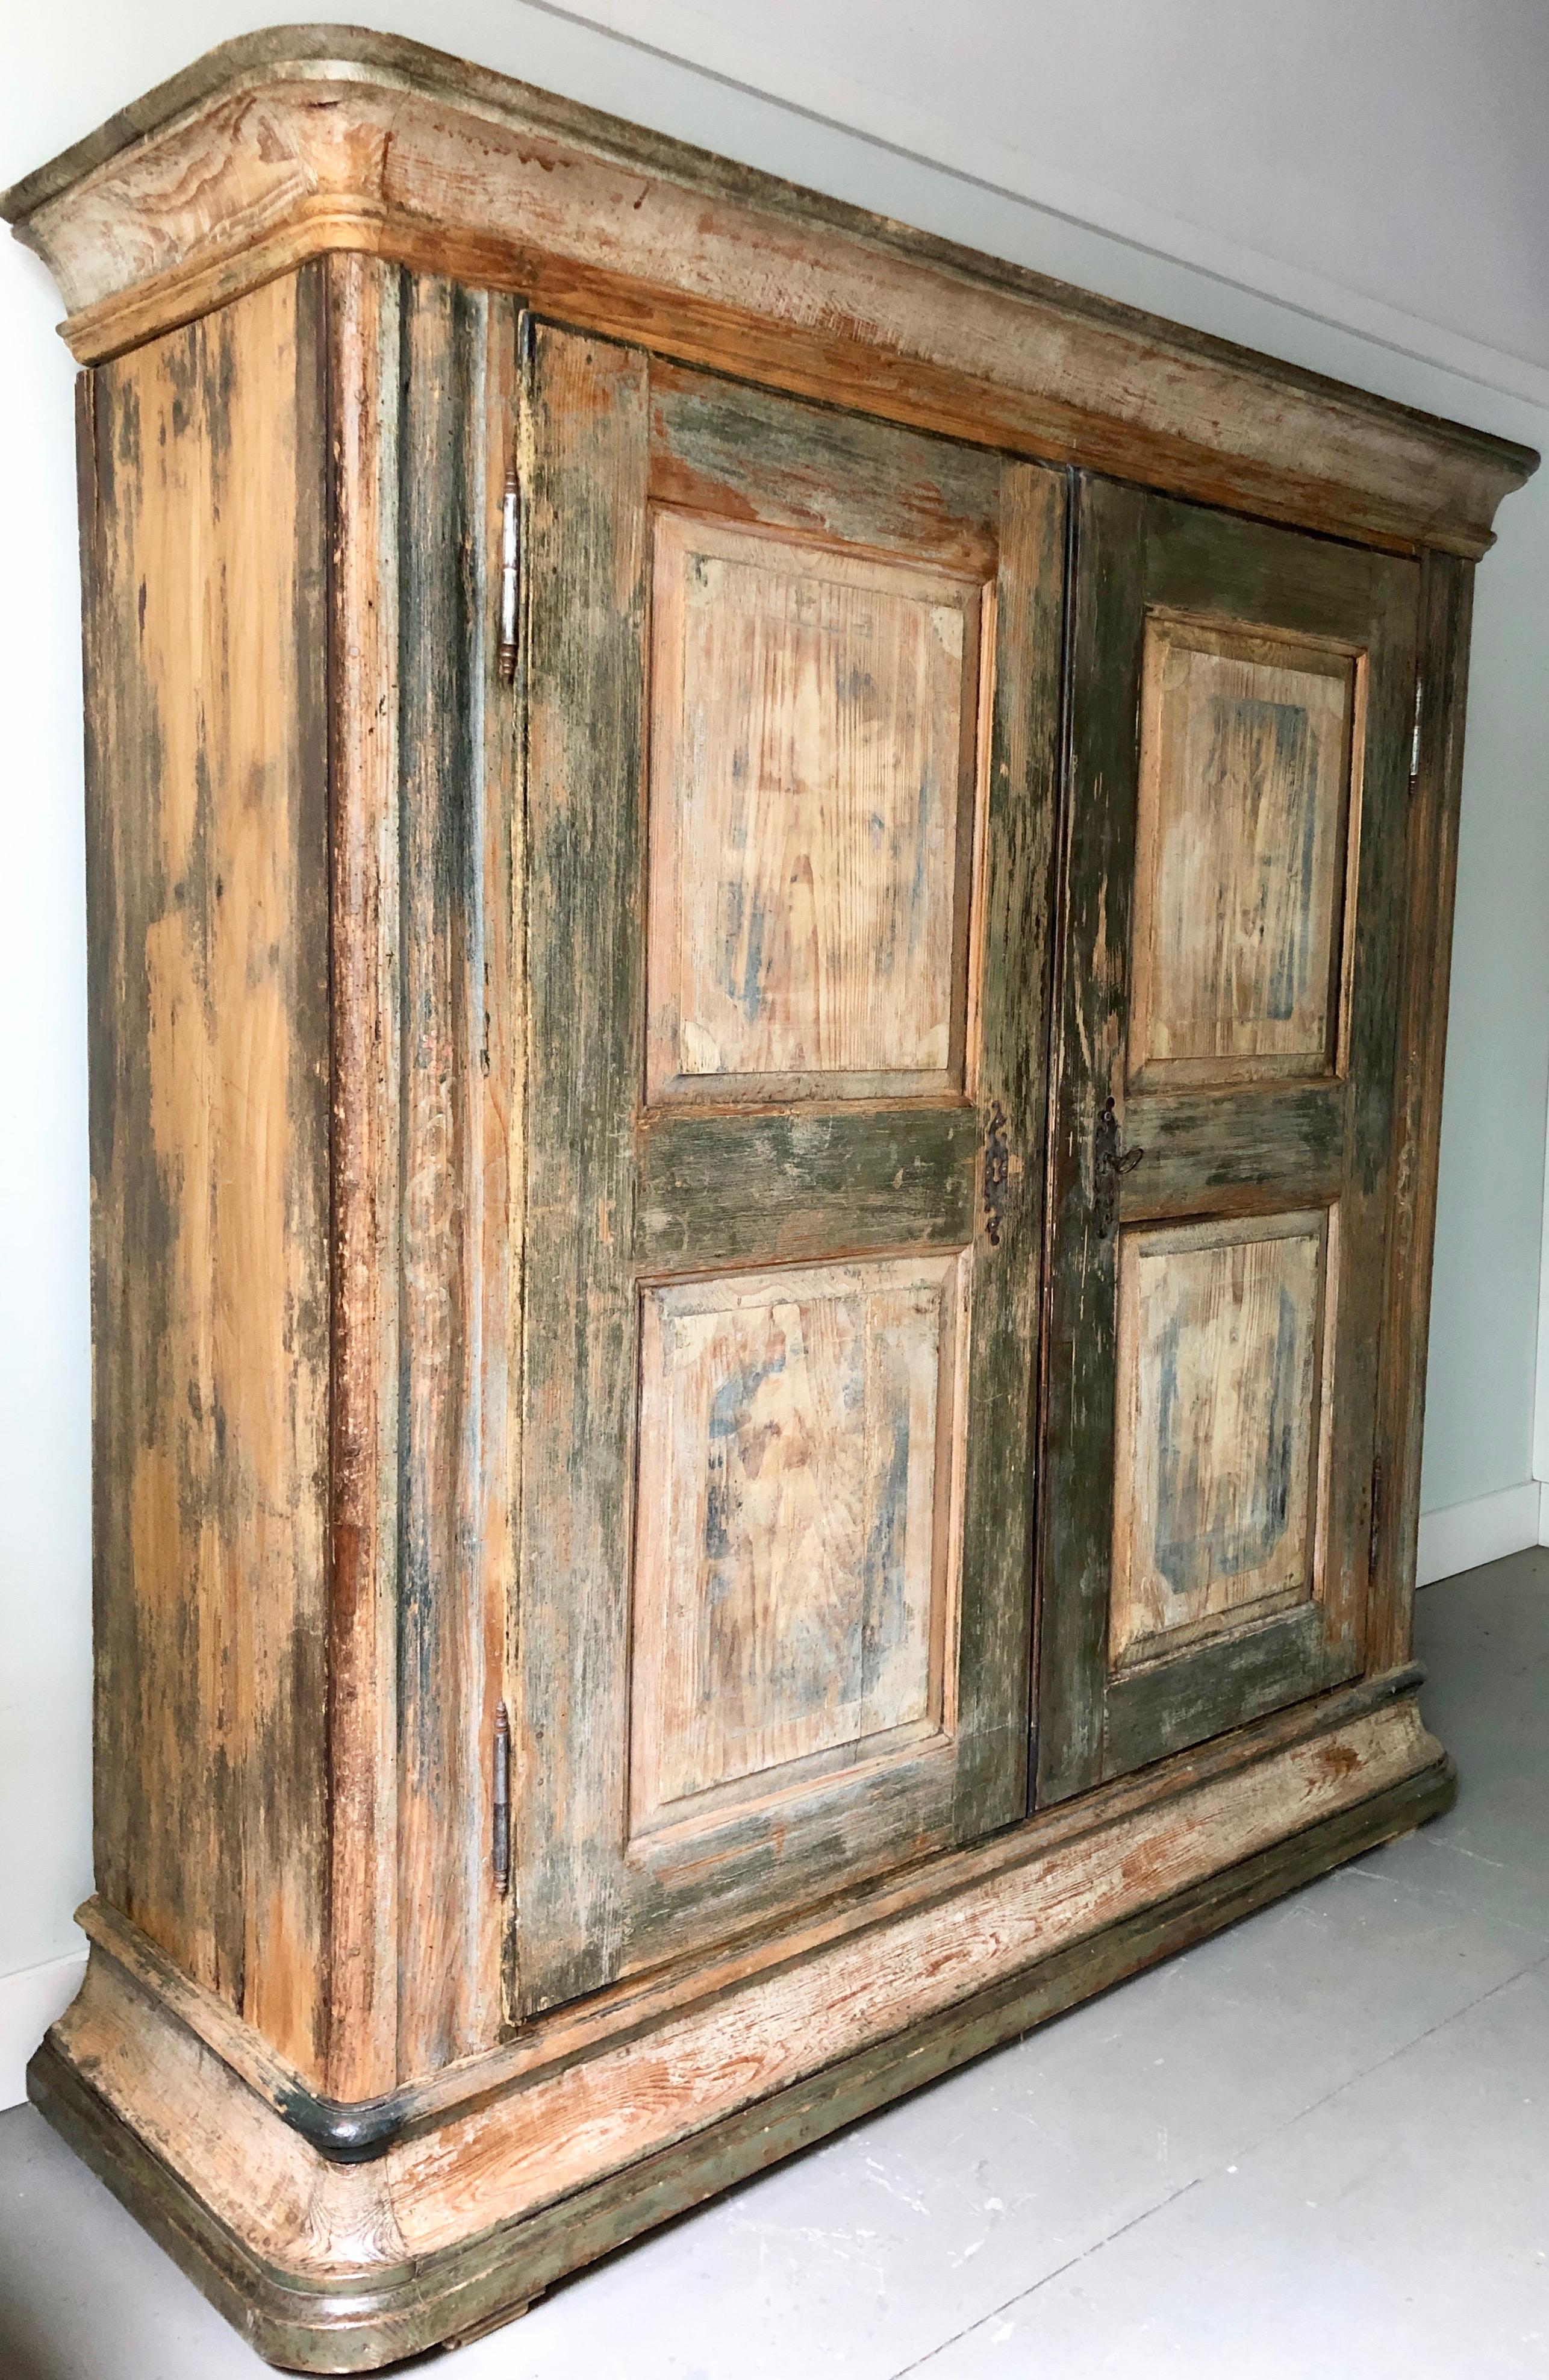 A large, handsome 19th century Swedish armoire/cabinet with two paneled doors and original hardware’s.
Outside paint in original blue patina and inside in natural pine with multiple shelves providing for amble storage.
Sweden, circa 1860.